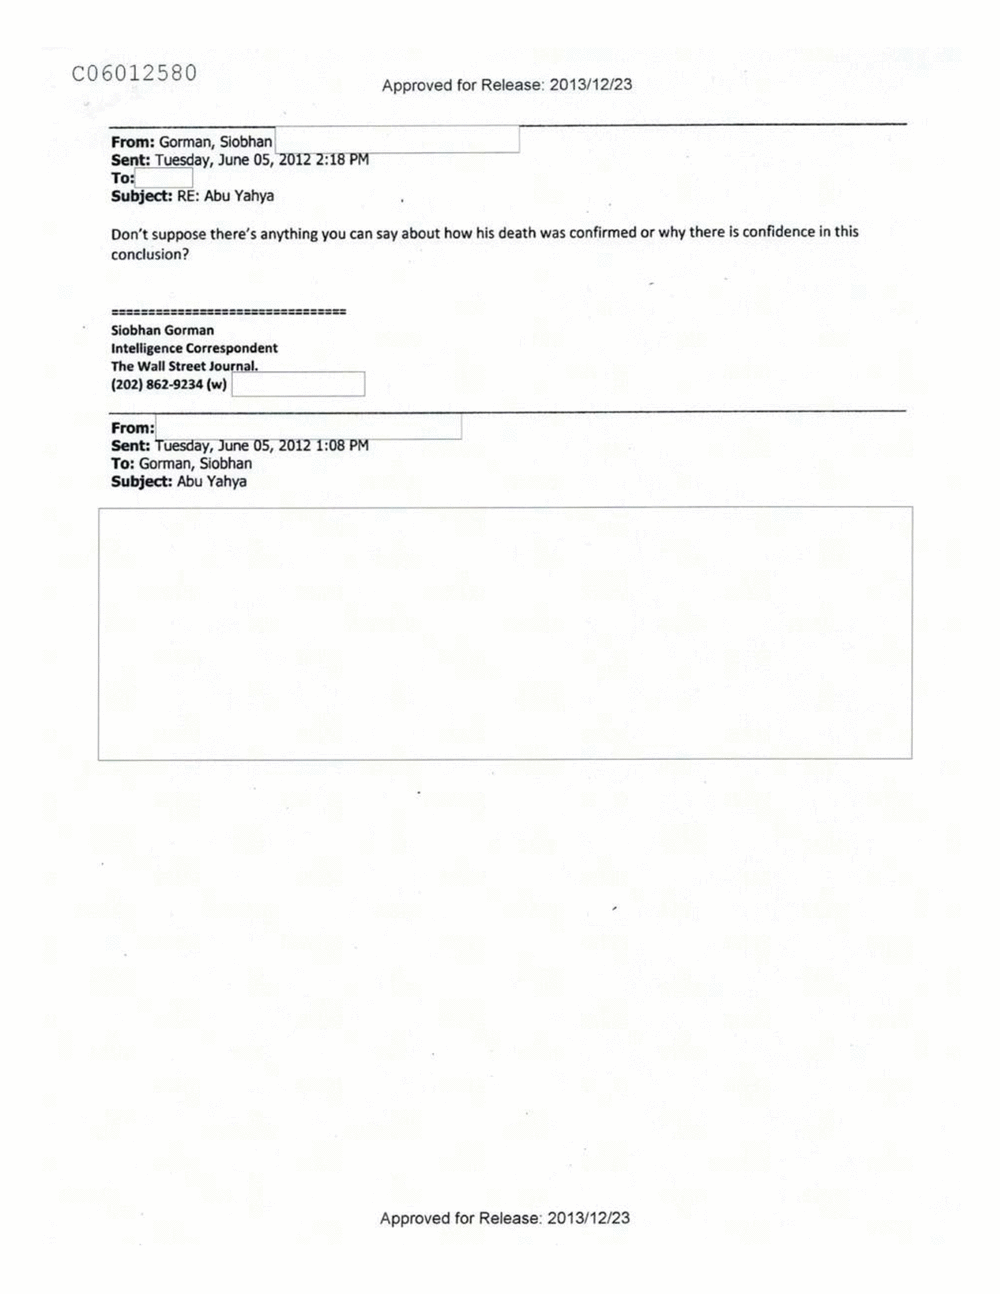 Page 119 from Email Correspondence Between Reporters and CIA Flacks